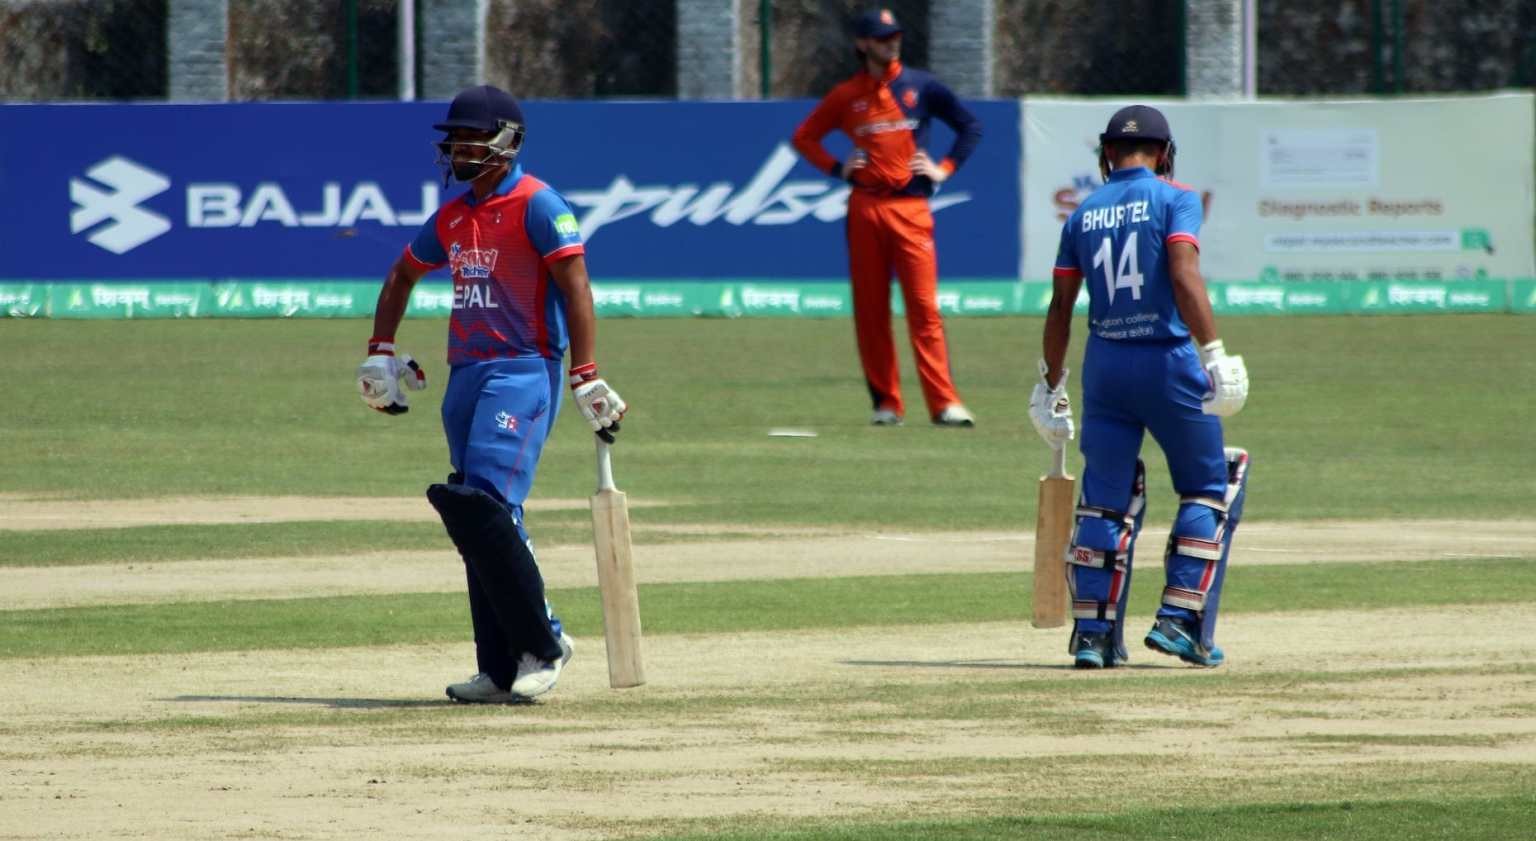 Nepal lost to Netherlands